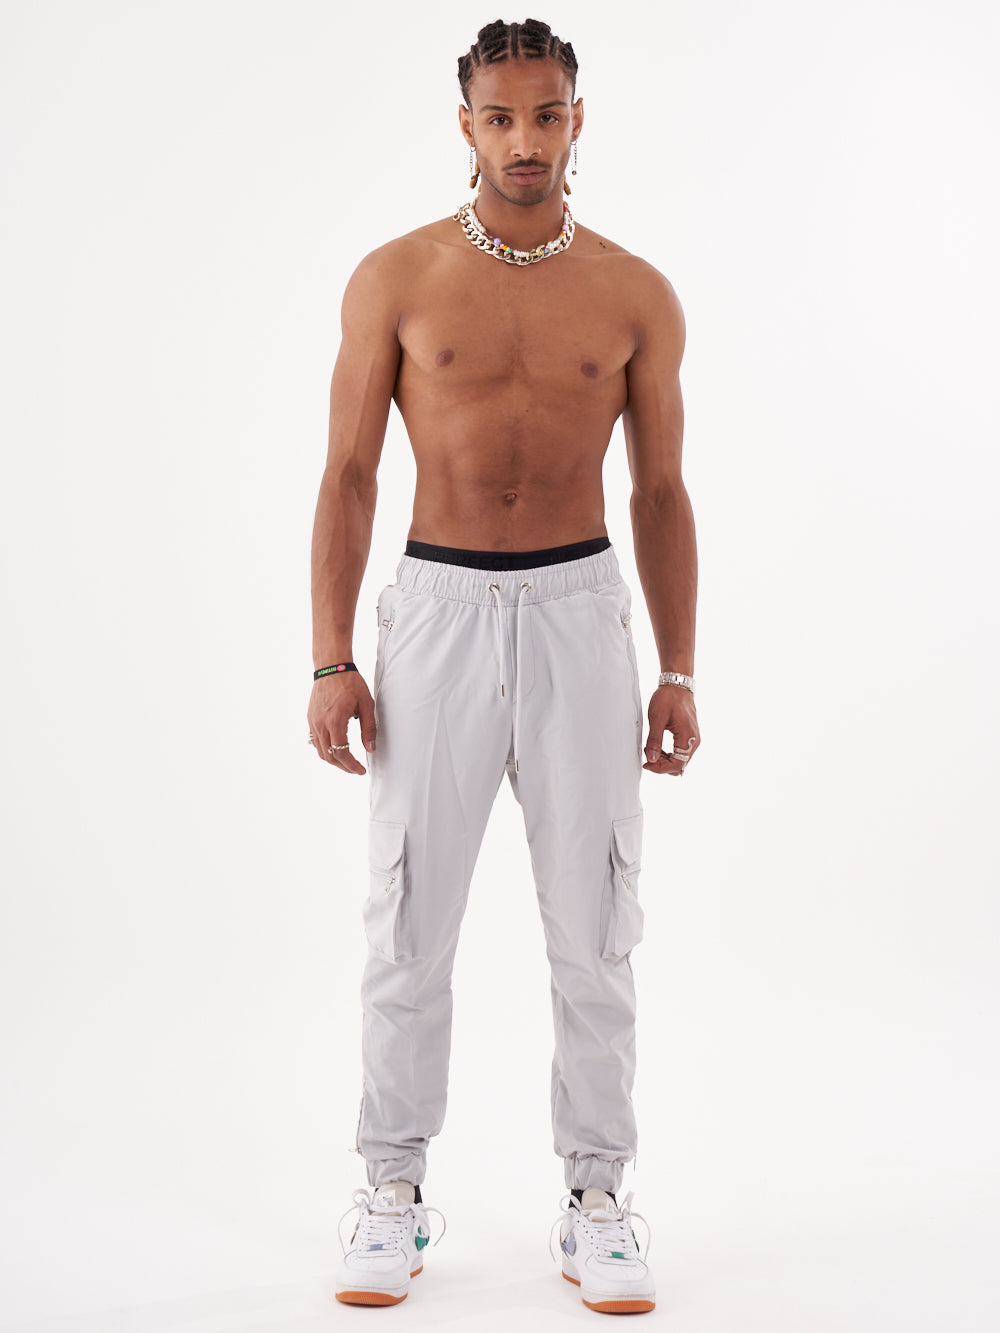 A man in ANARCHY JOGGERS posing in front of a white background.